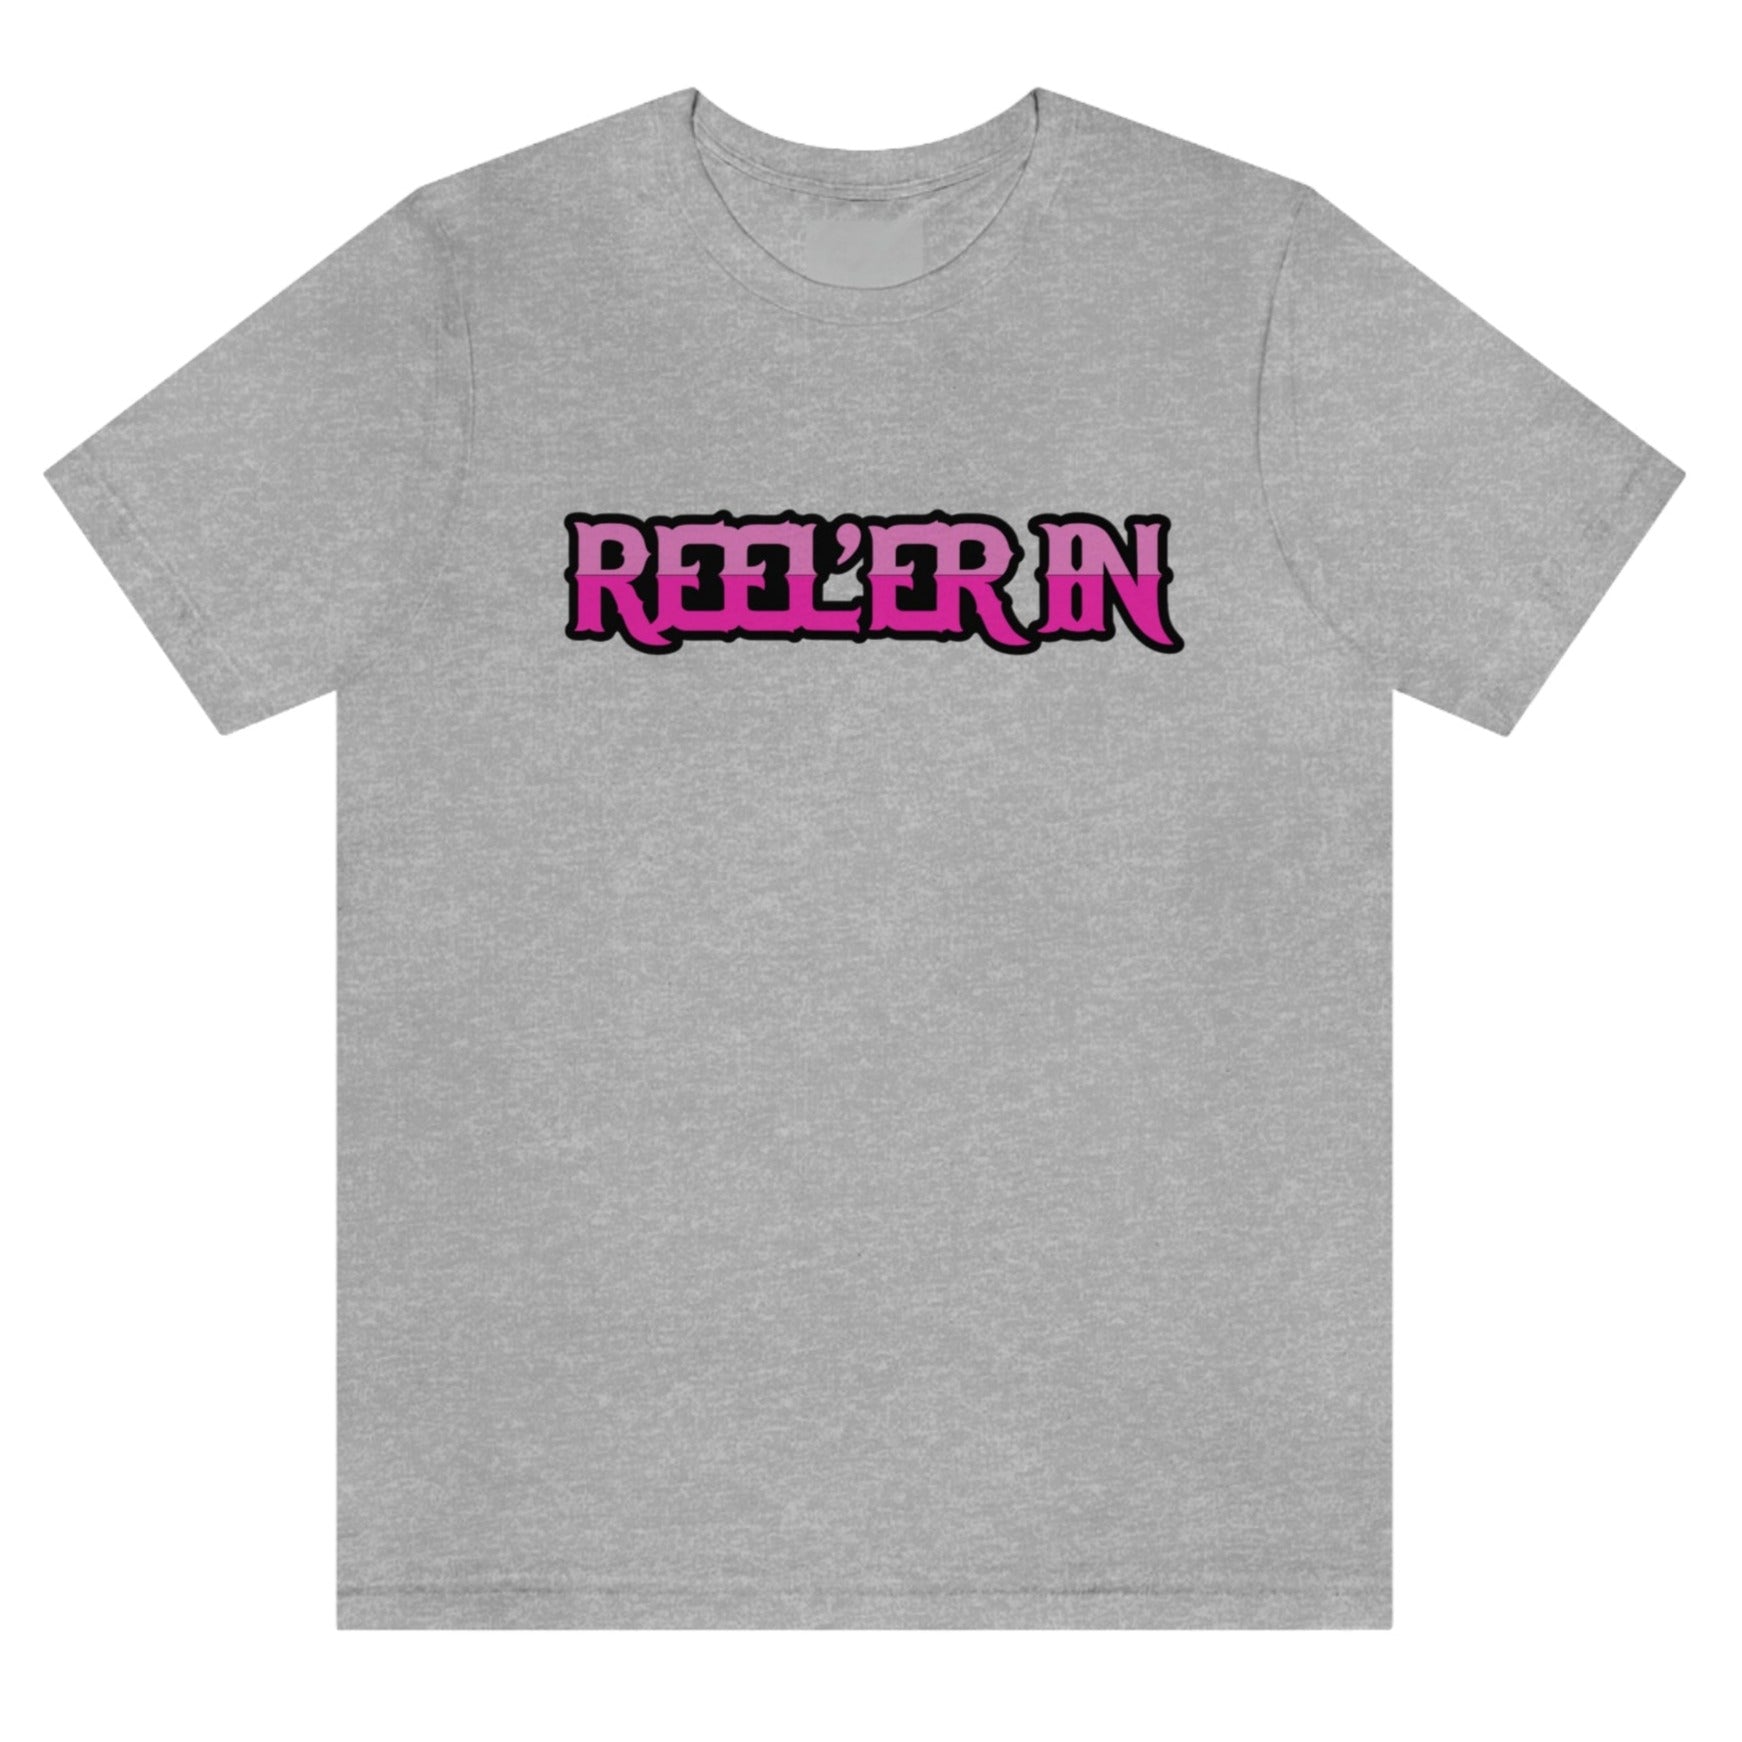 reeler-in-athletic-heather-grey-t-shirt-fishing